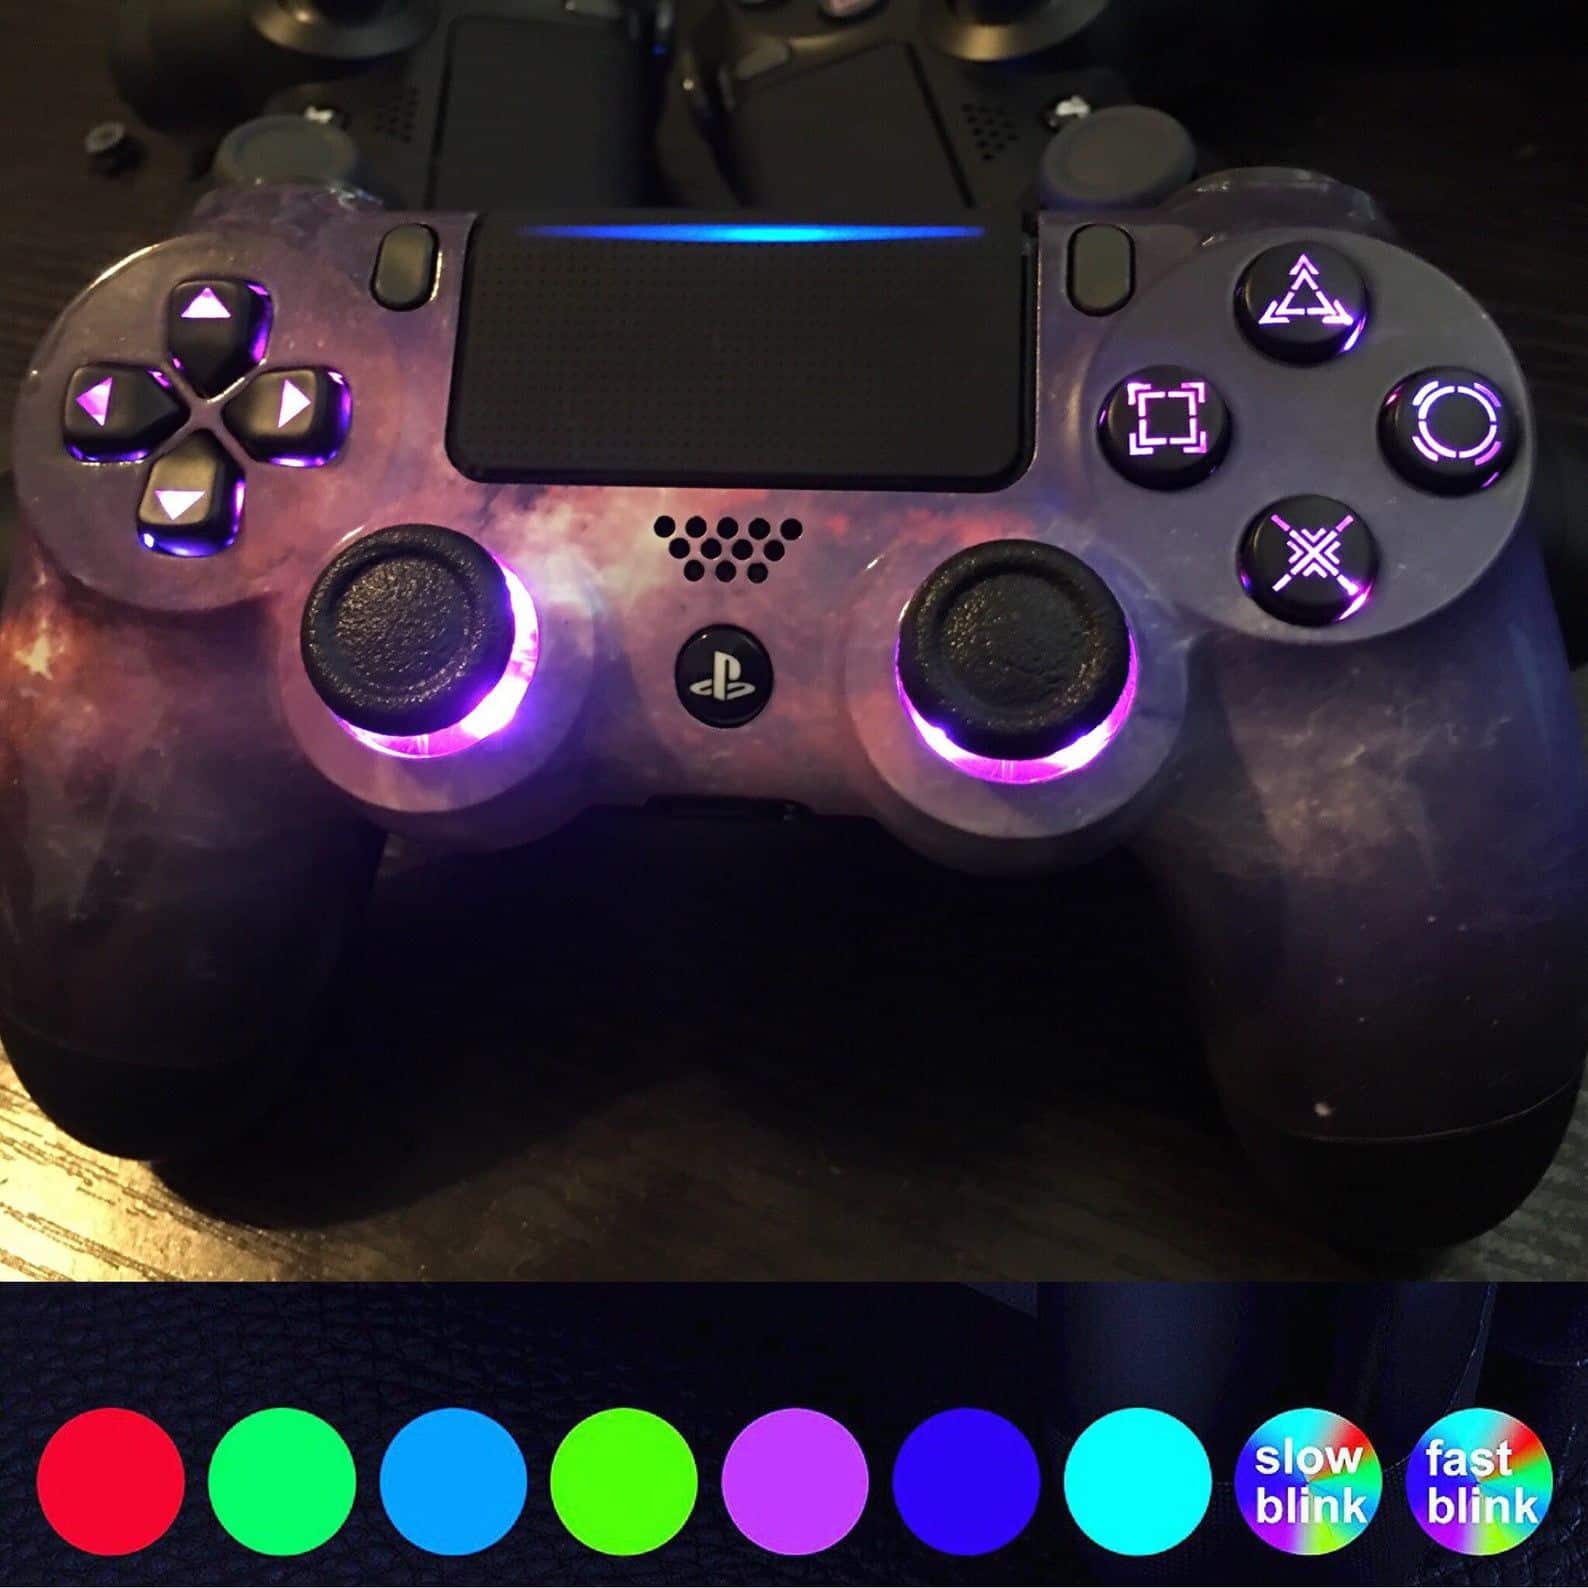 Custom PlayStation 4 Controller with LED color changing